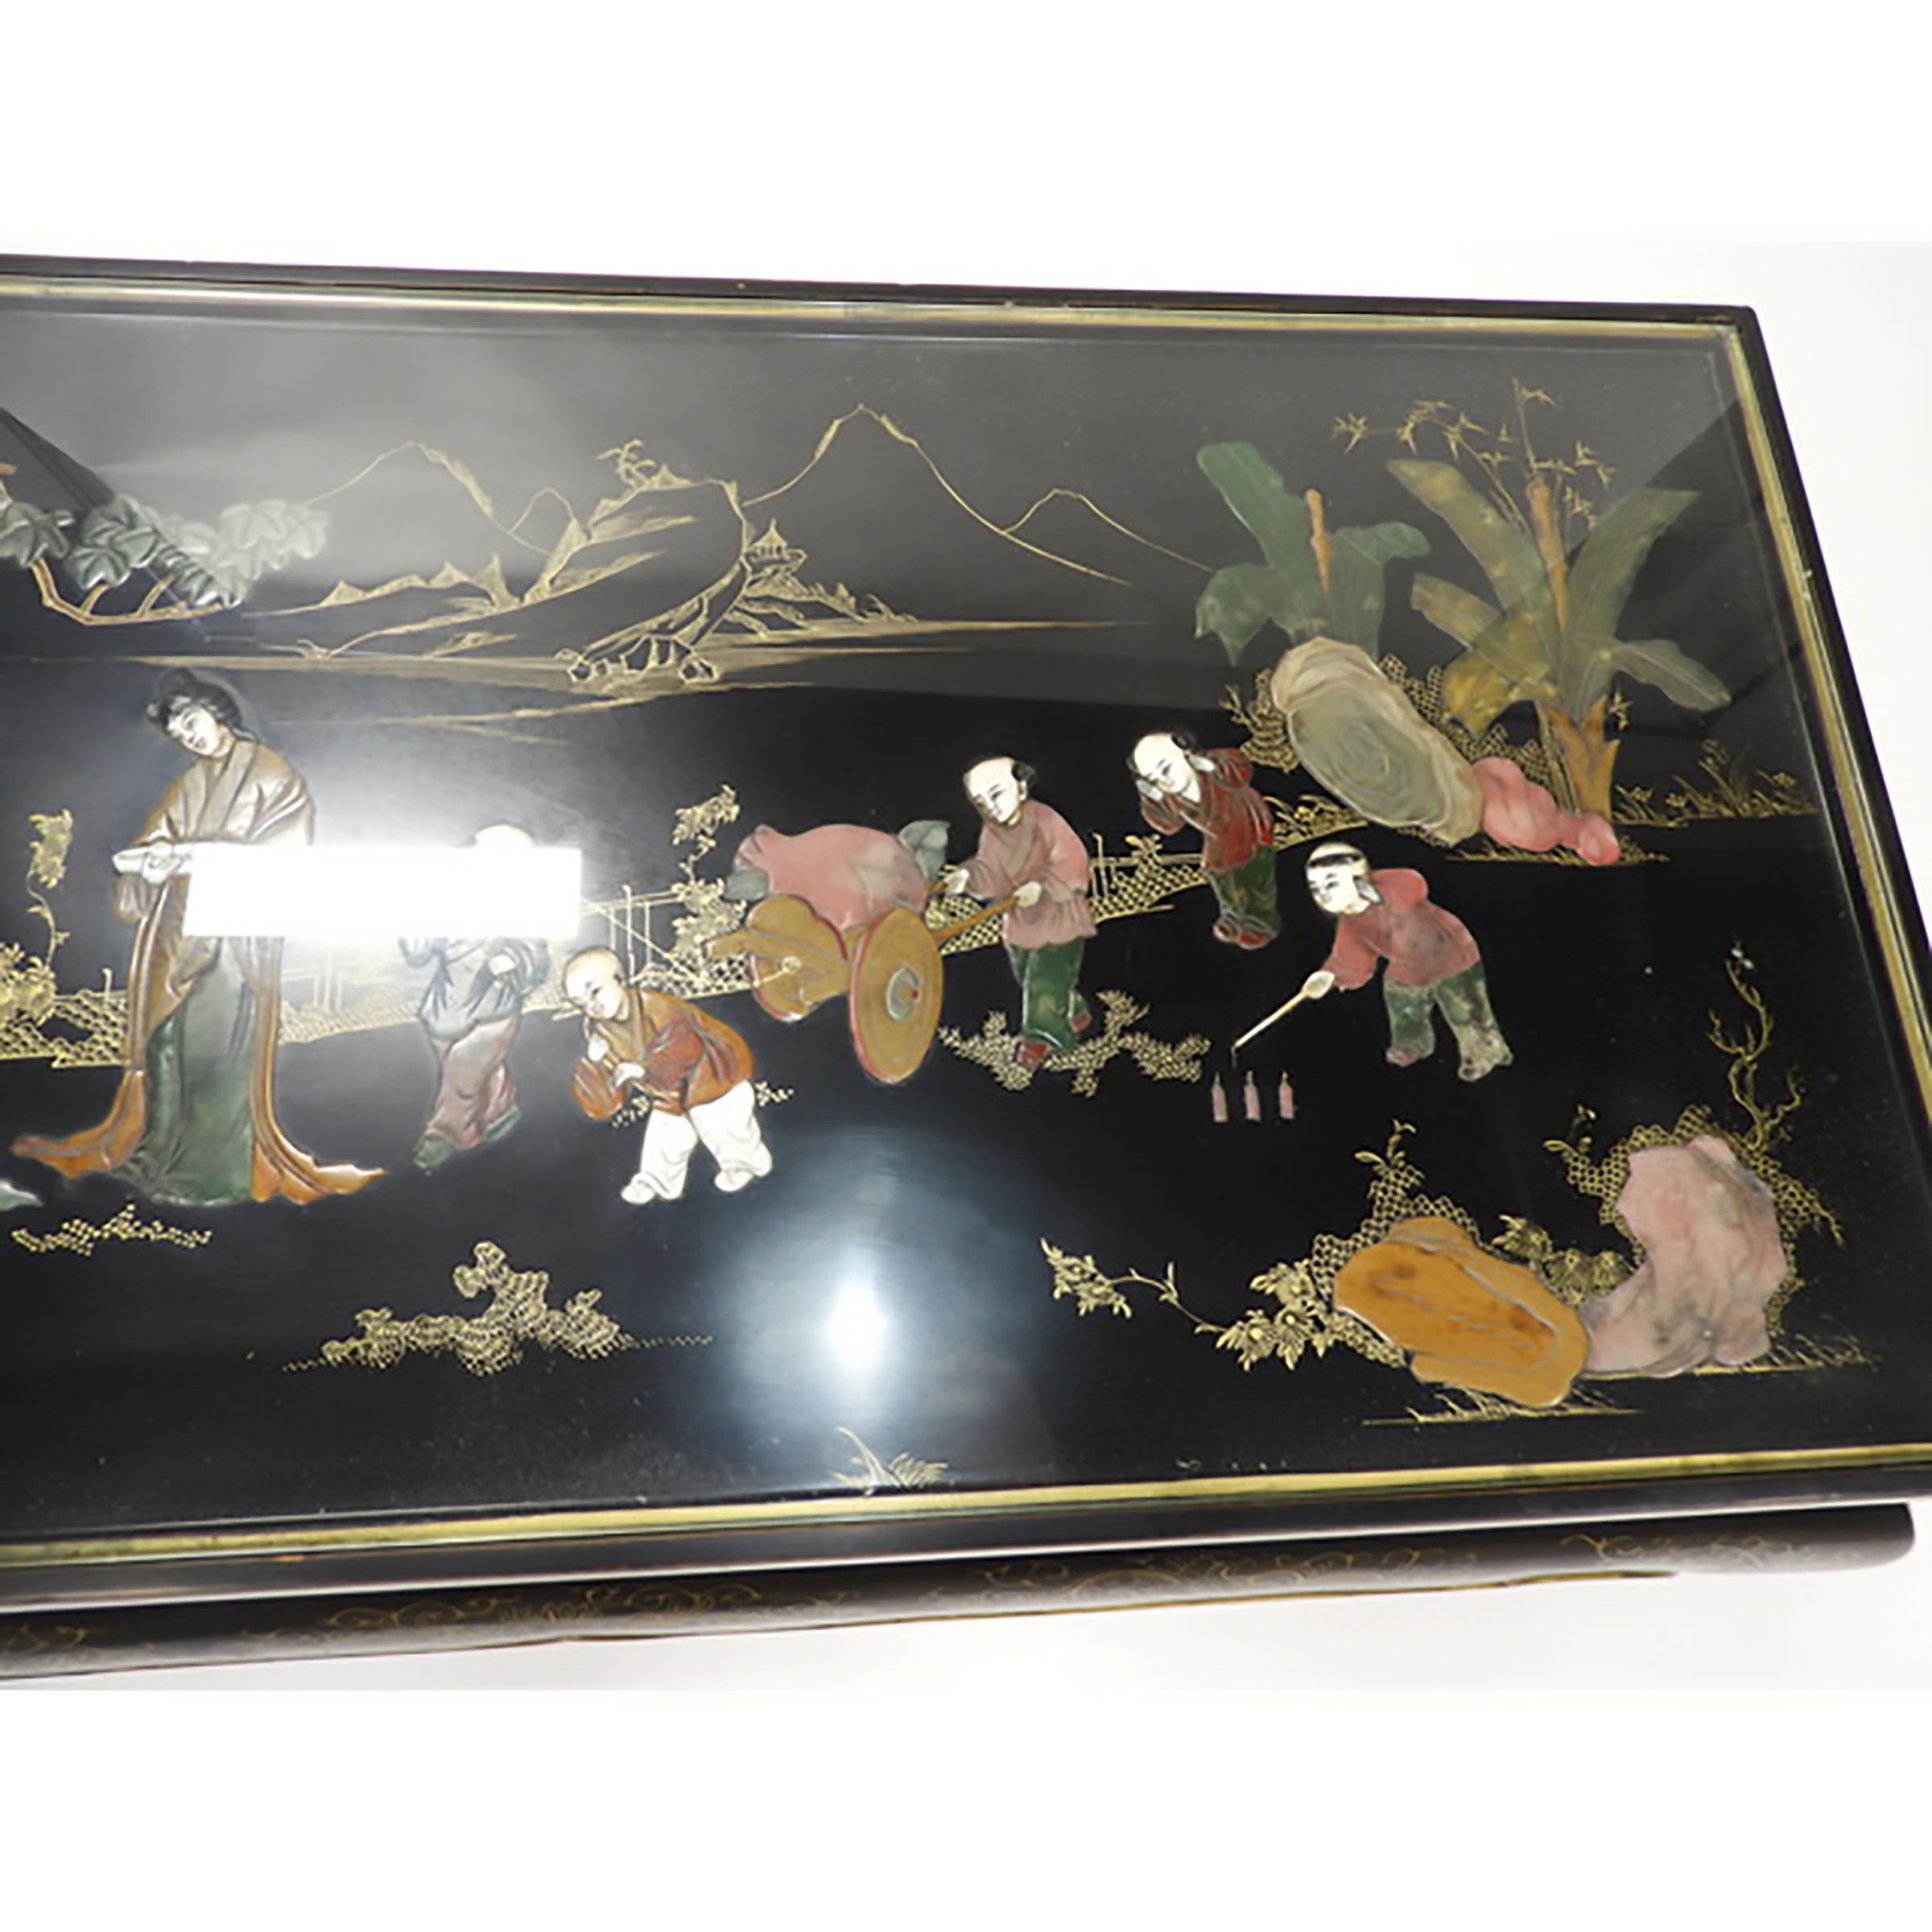 A Chinese Gilded and Lacquered Coffee Table With Glass Top, Early to Mid 20th Century, 民国 描金黑漆人物纹桌, - Image 6 of 6